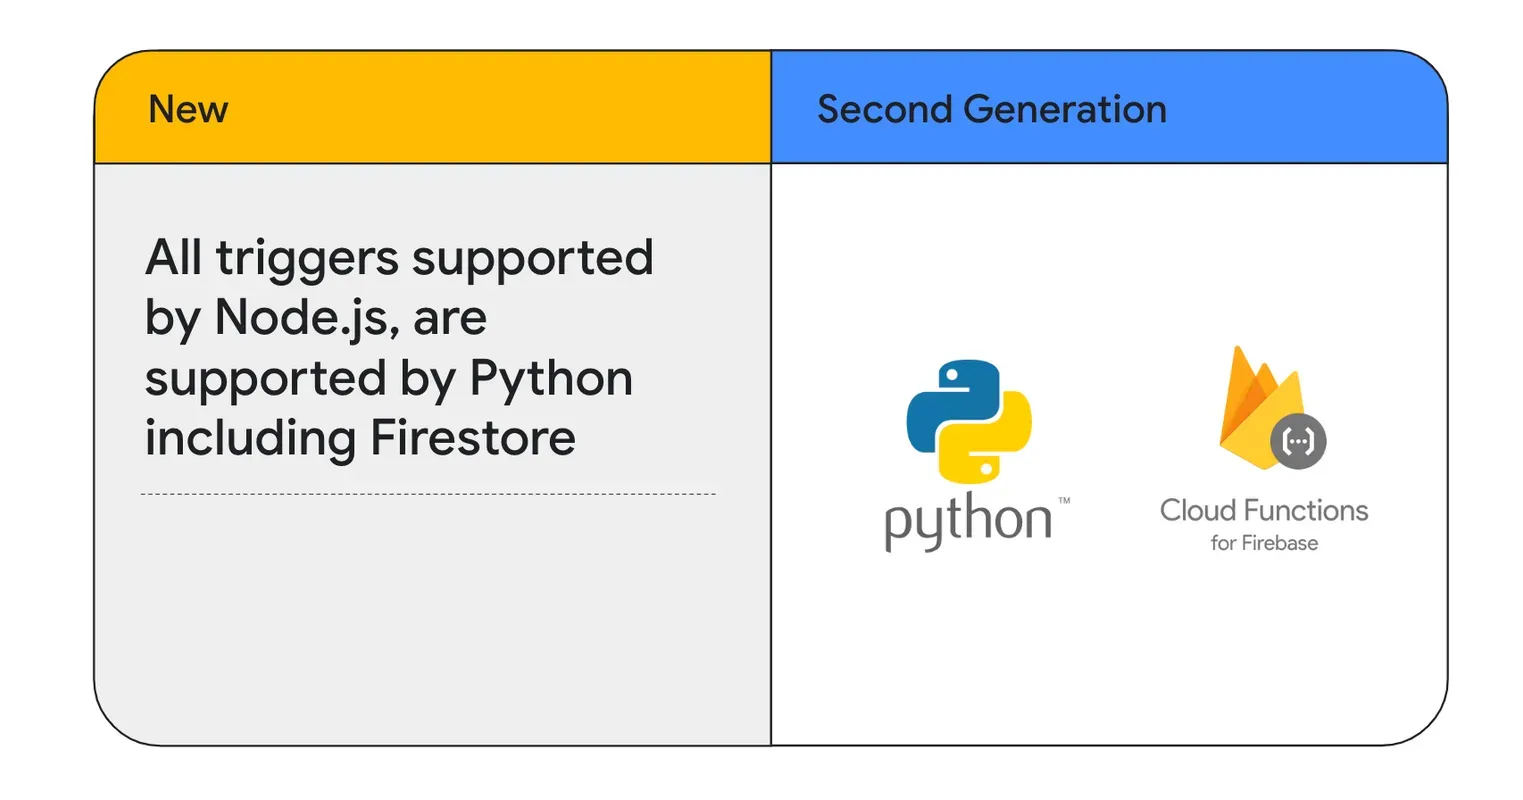 Python support is launching with all of the triggers supported in the Cloud Functions for Firebase (2nd gen) library for Node.js - including support for Firestore triggers